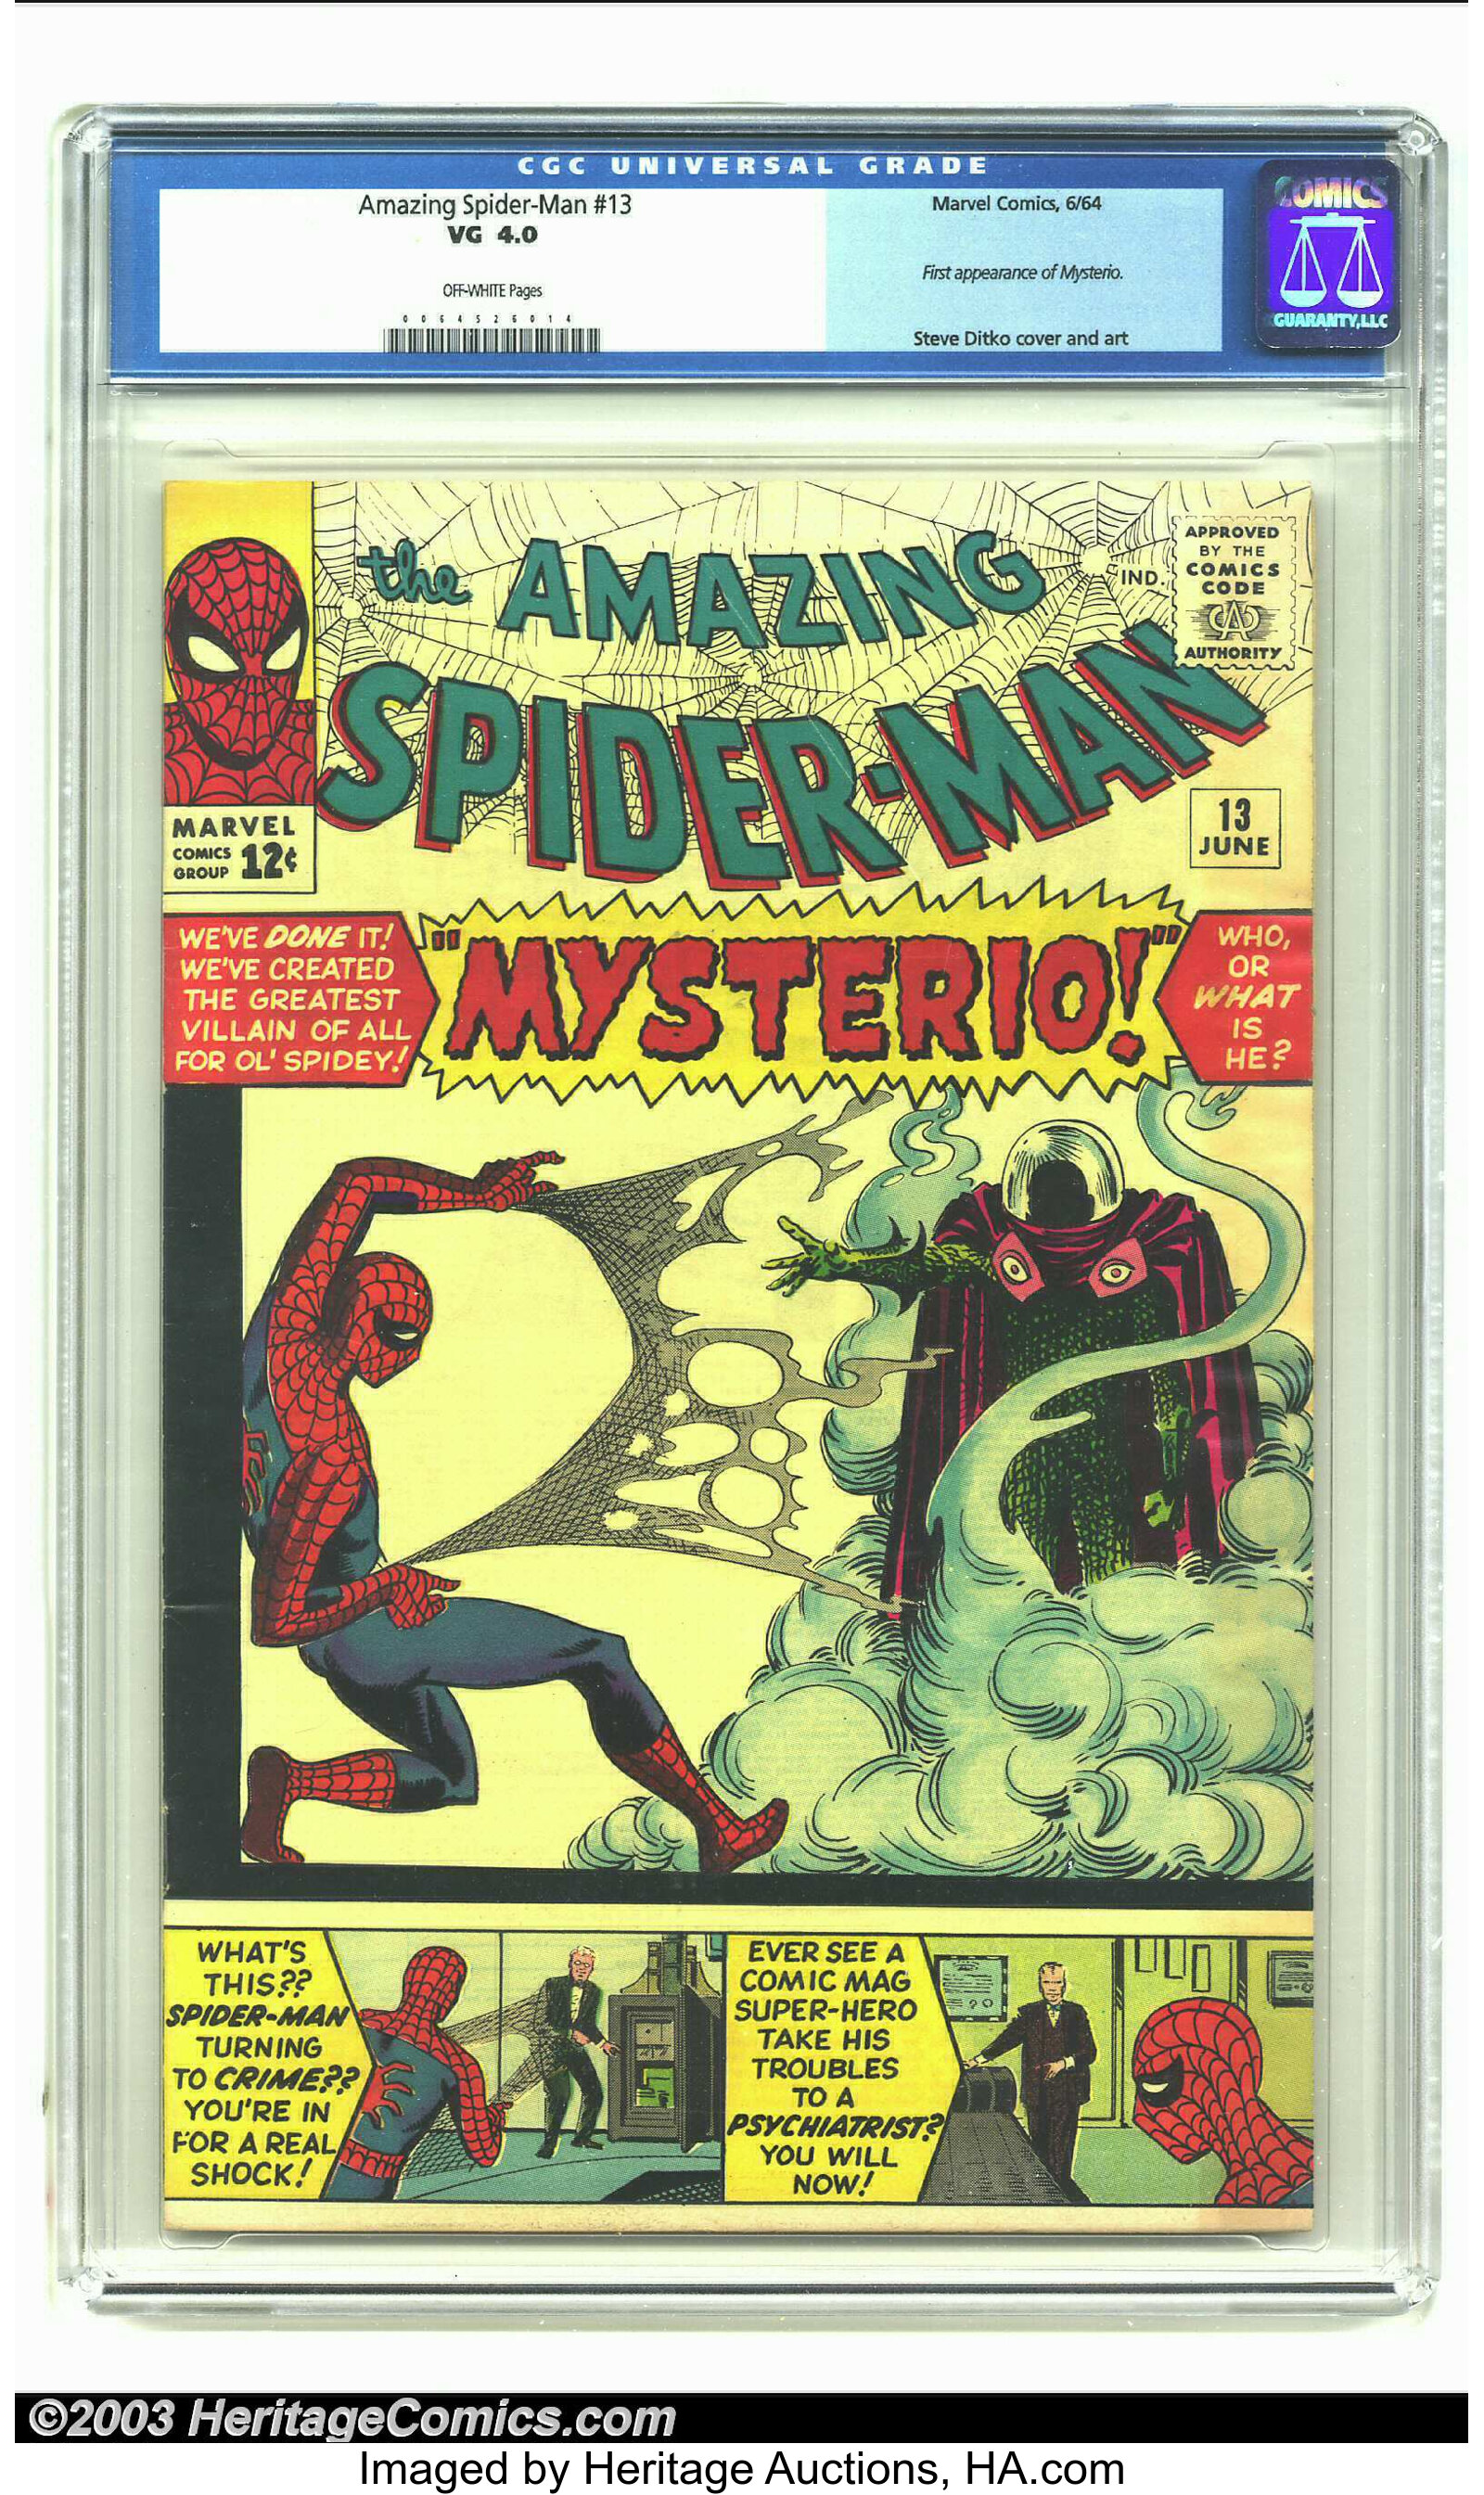 correr Seguro Intercambiar Amazing Spider-Man #13 (Marvel, 1964) CGC VG 4.0 Off-white pages. | Lot  #16085 | Heritage Auctions